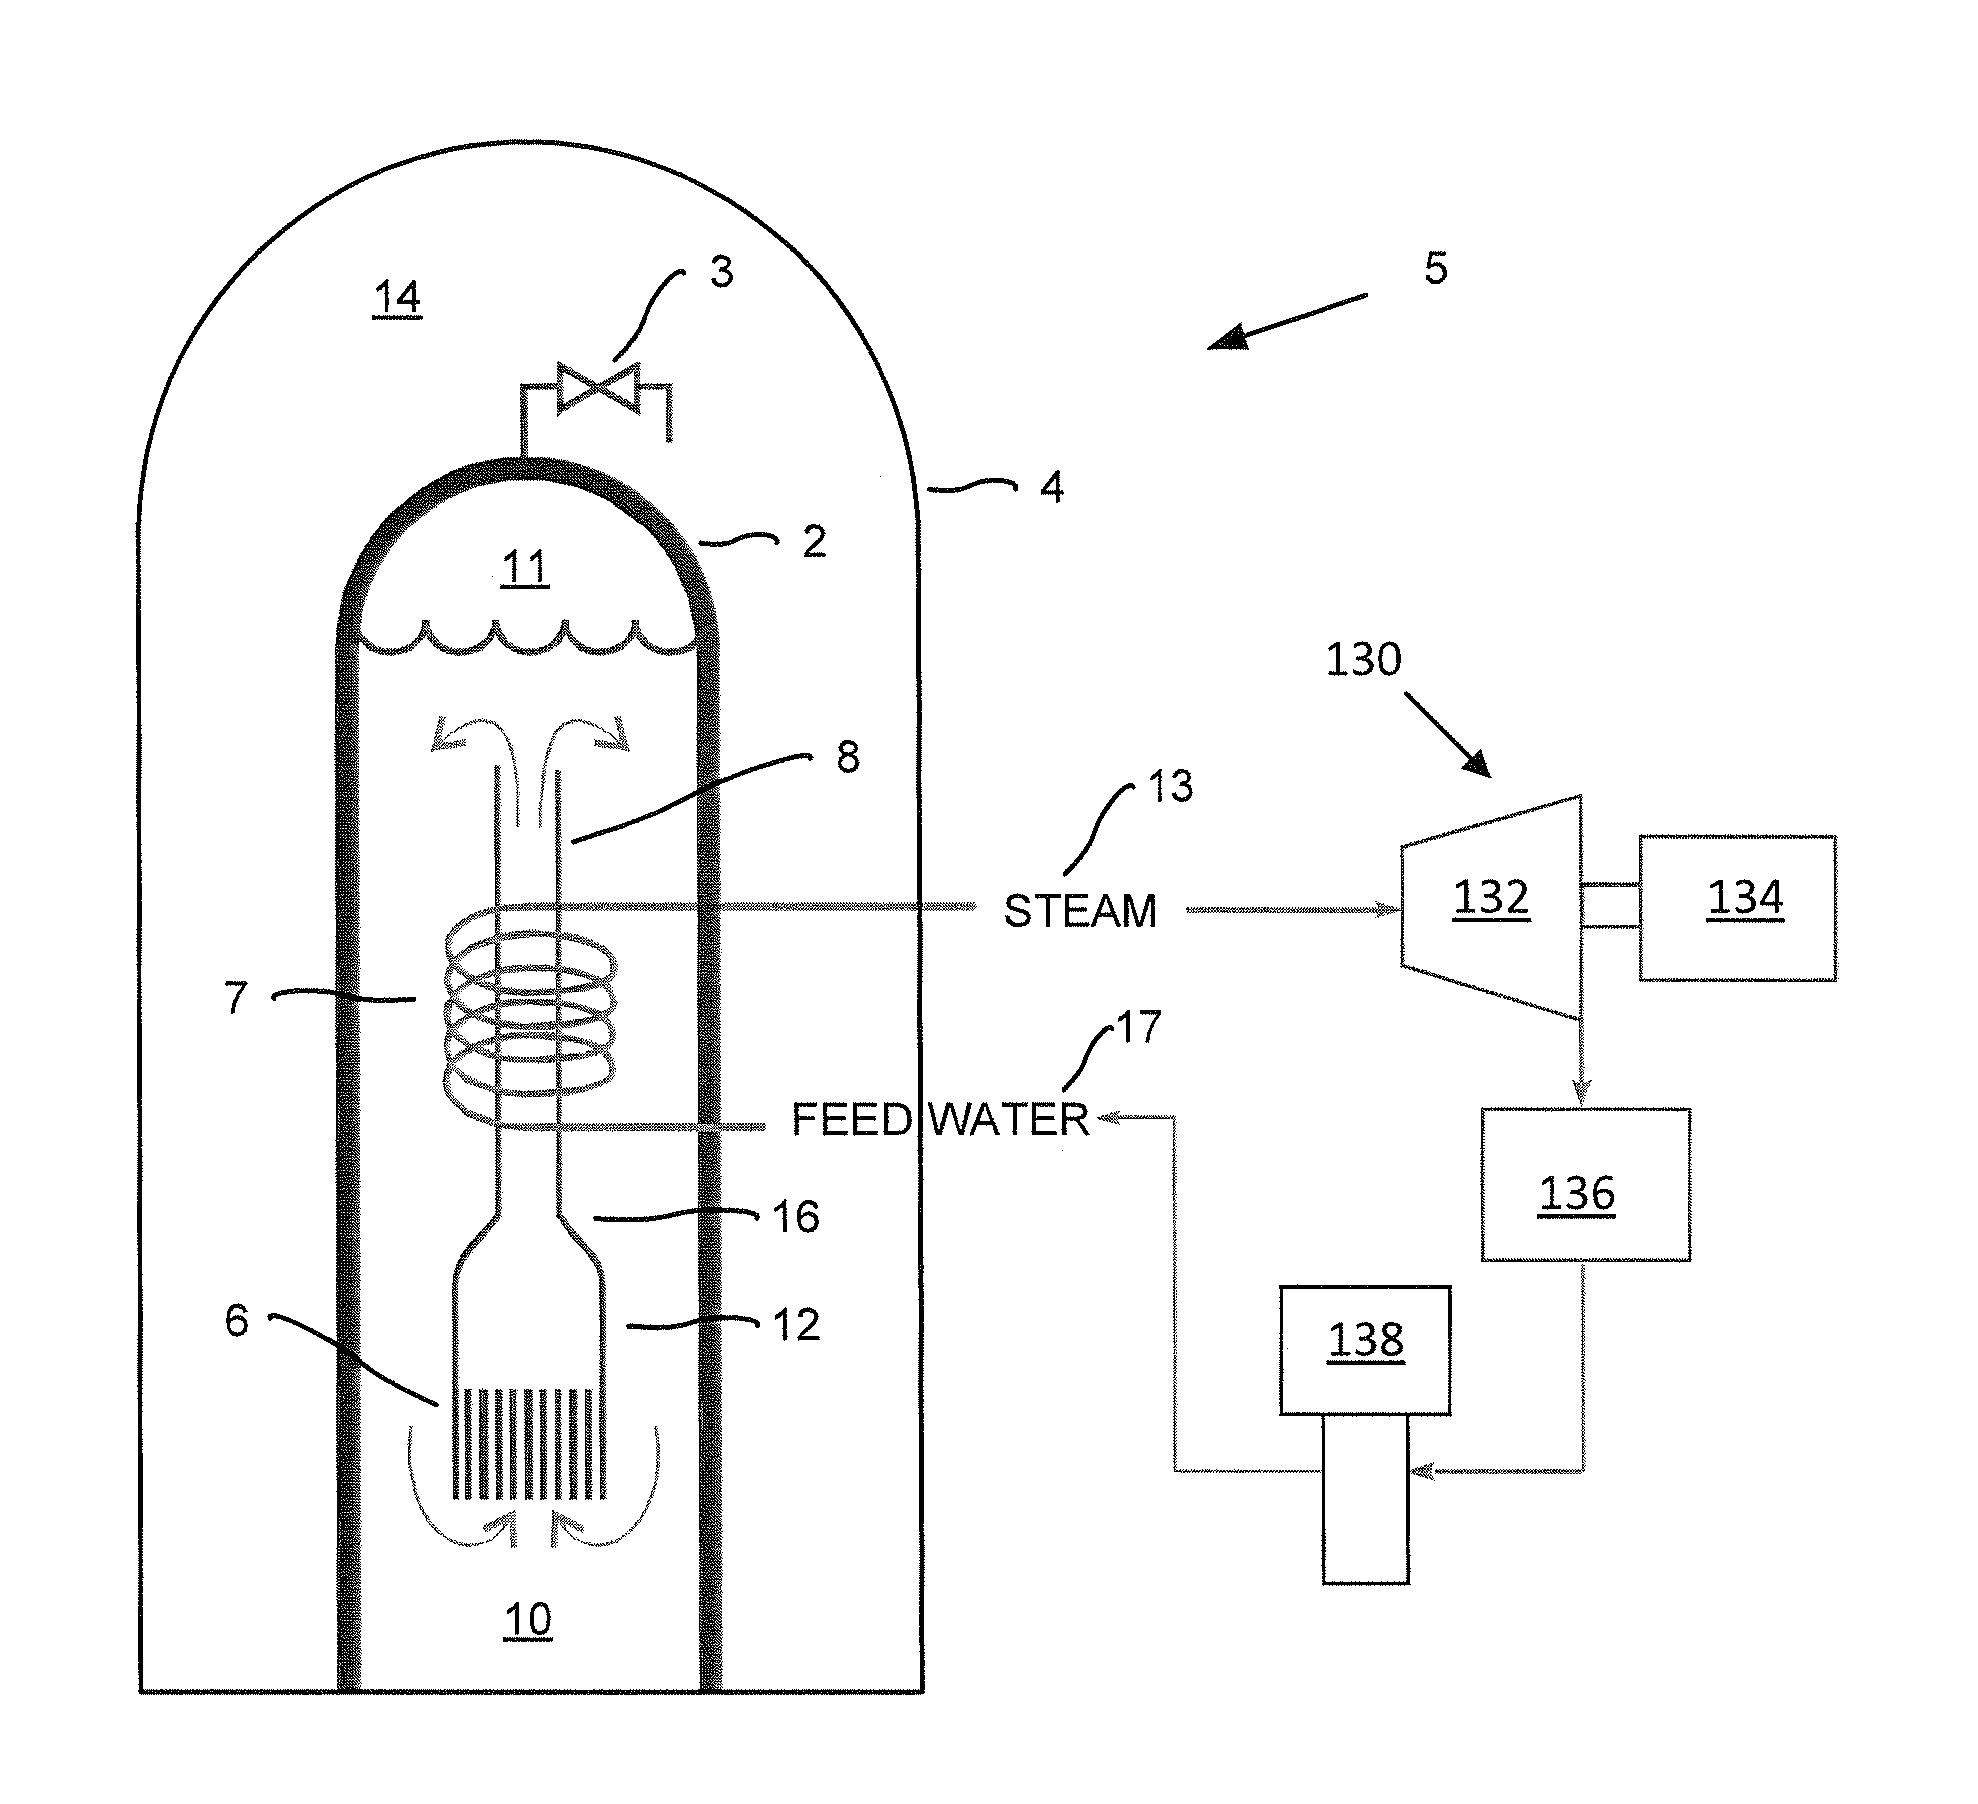 Helical coil steam generator